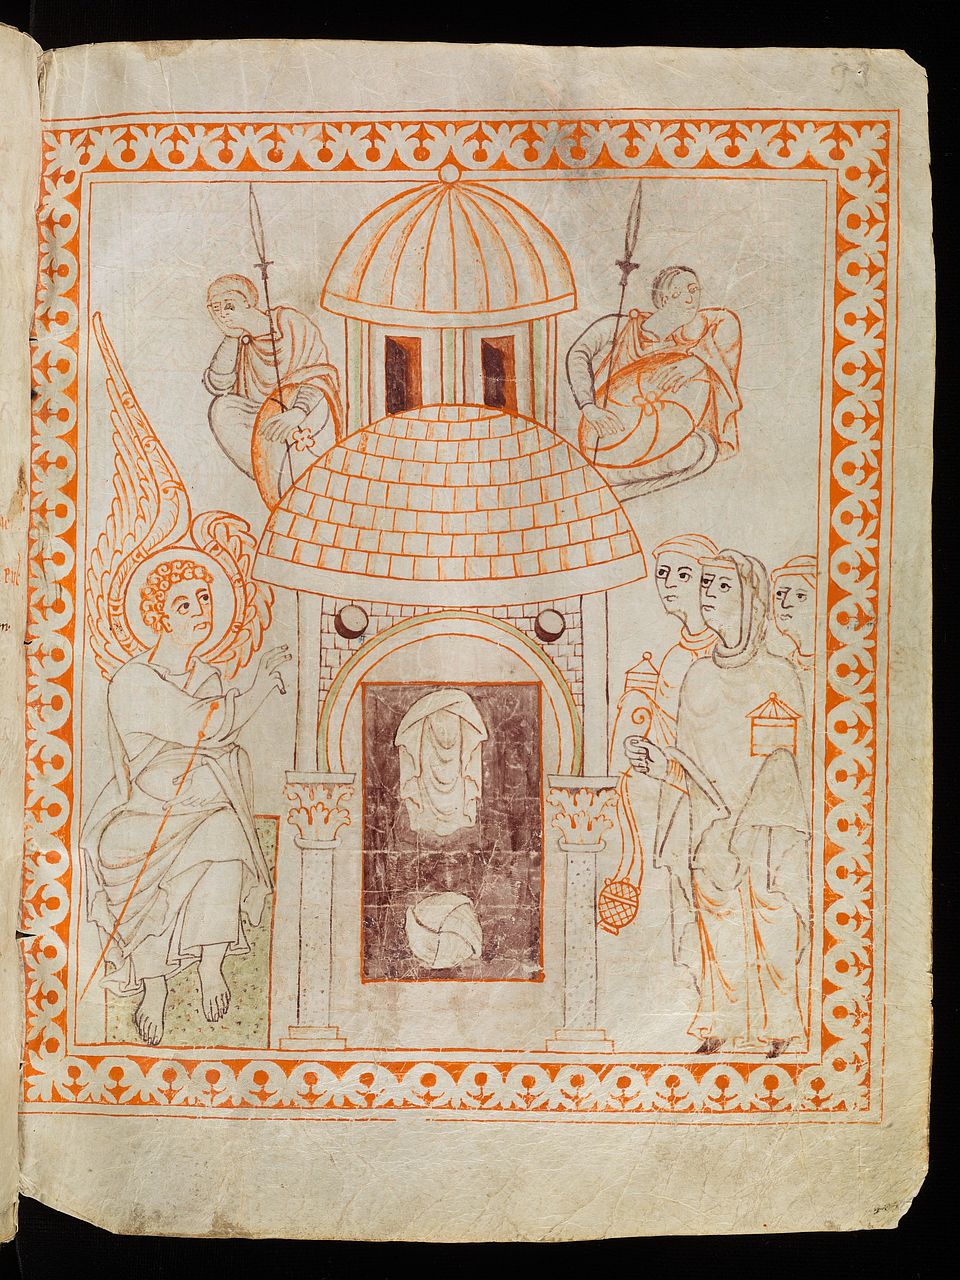 The Holy Women’s Visit to Christ’s Tomb (Visitatio sepulchri). St. Gallen, Stiftsbibliothek, Cod. Sang. 391, p. 33. Made in St. Gallen, Switzerland, ca. 990-1000. 22 x 16.5 cm. Image courtesy of e-codices – Virtual Manuscript Library of Switzerland. 